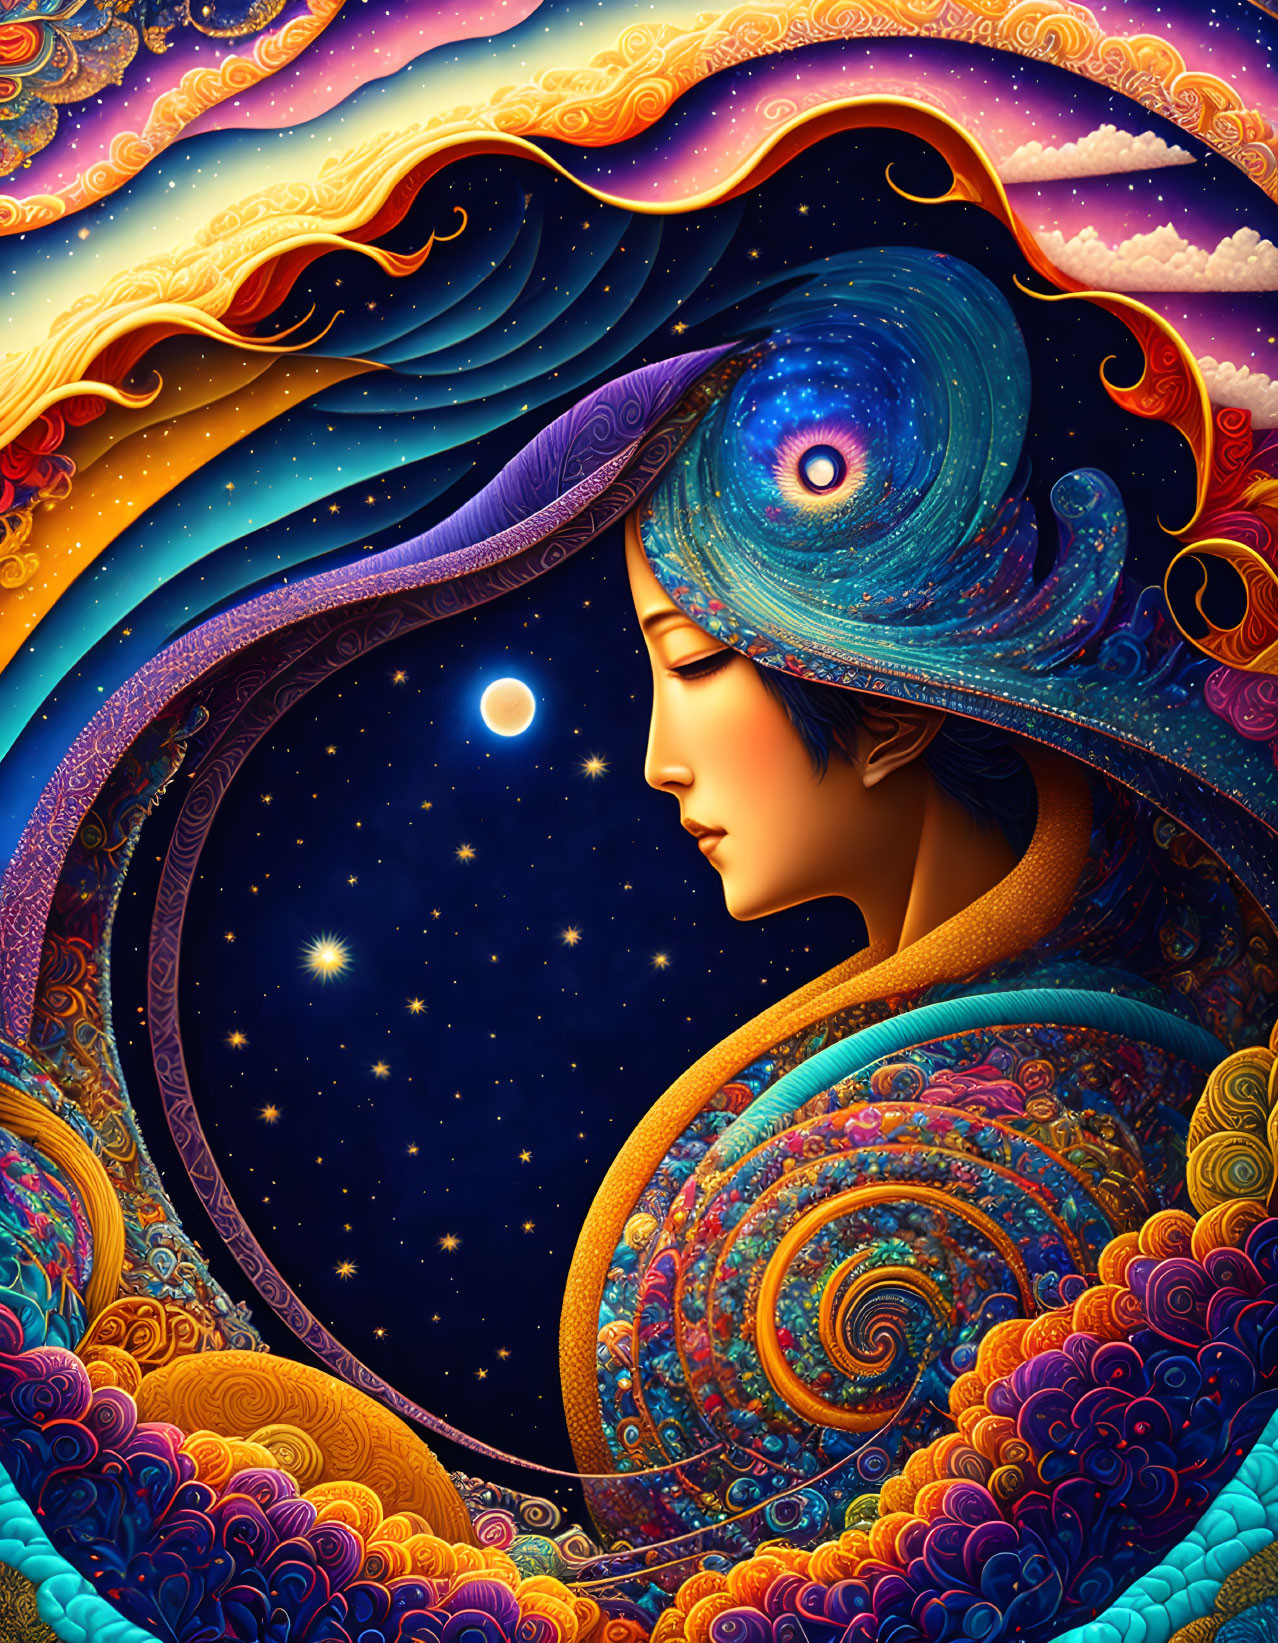 Colorful surreal illustration of woman with cosmic theme